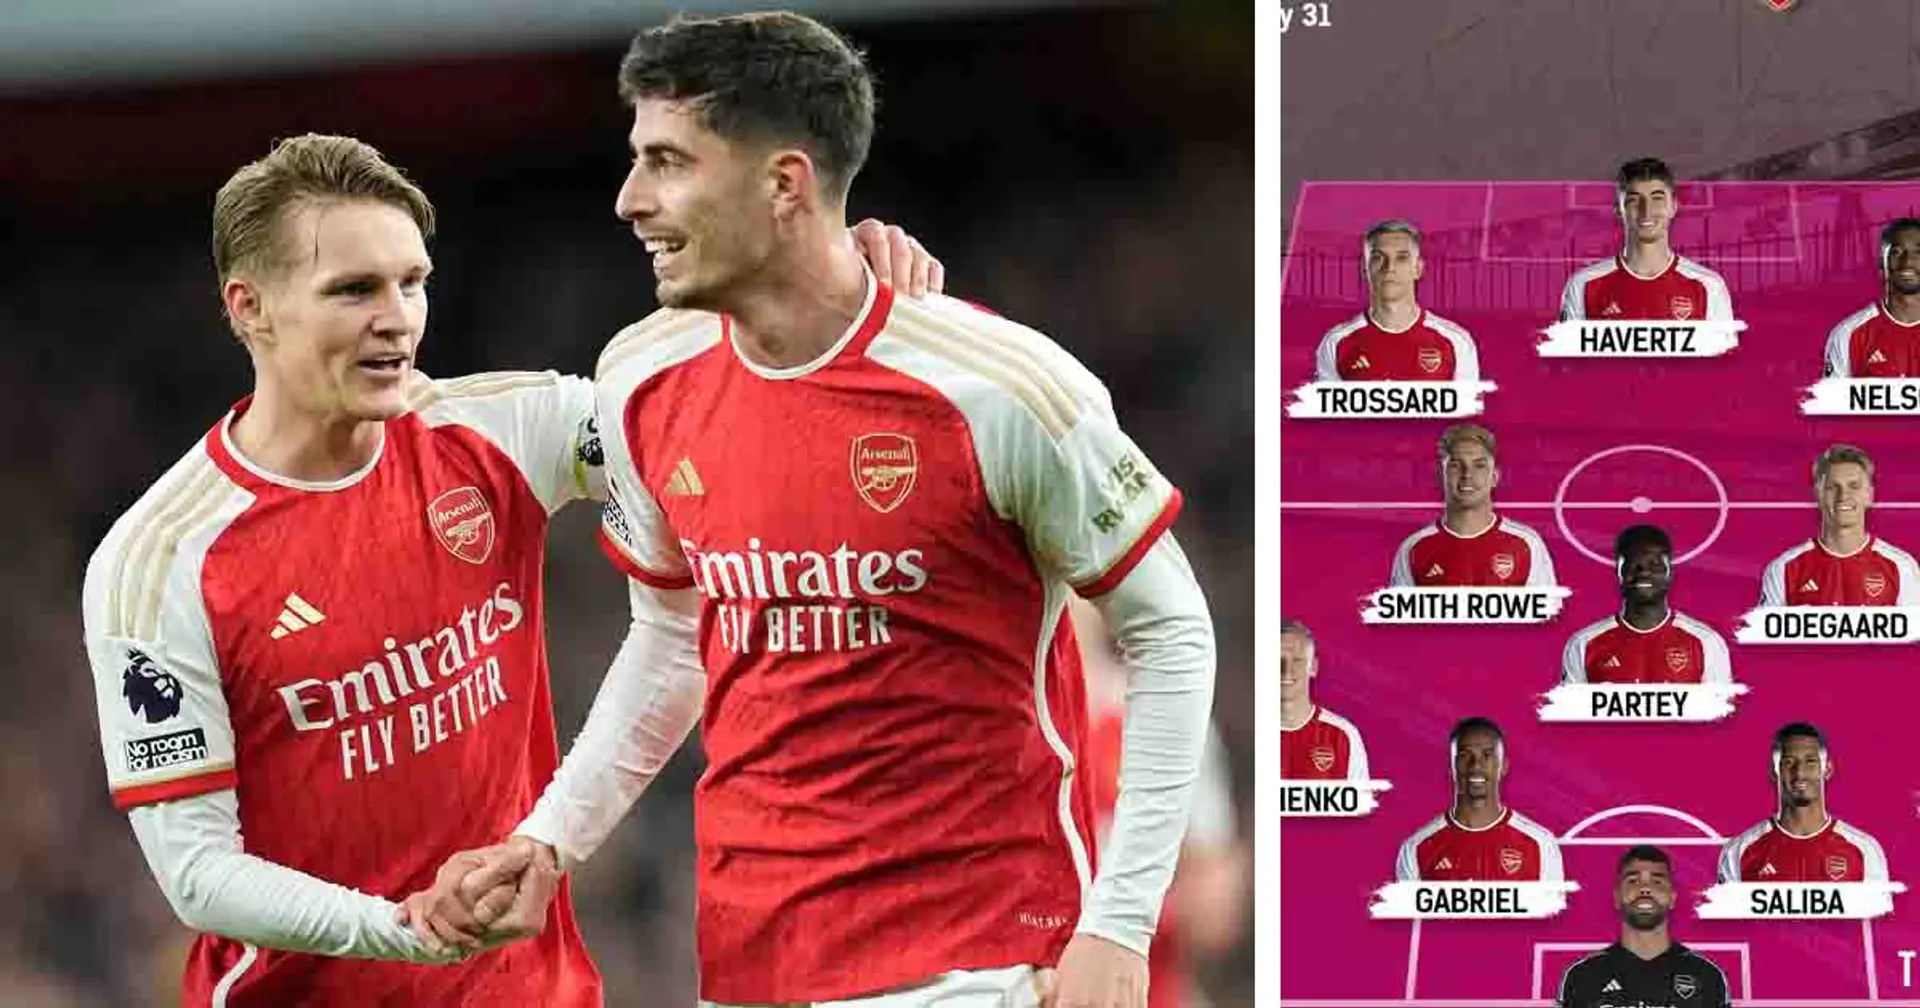 Arsenal's biggest strengths in Luton Town win shown in lineup - 4 players feature